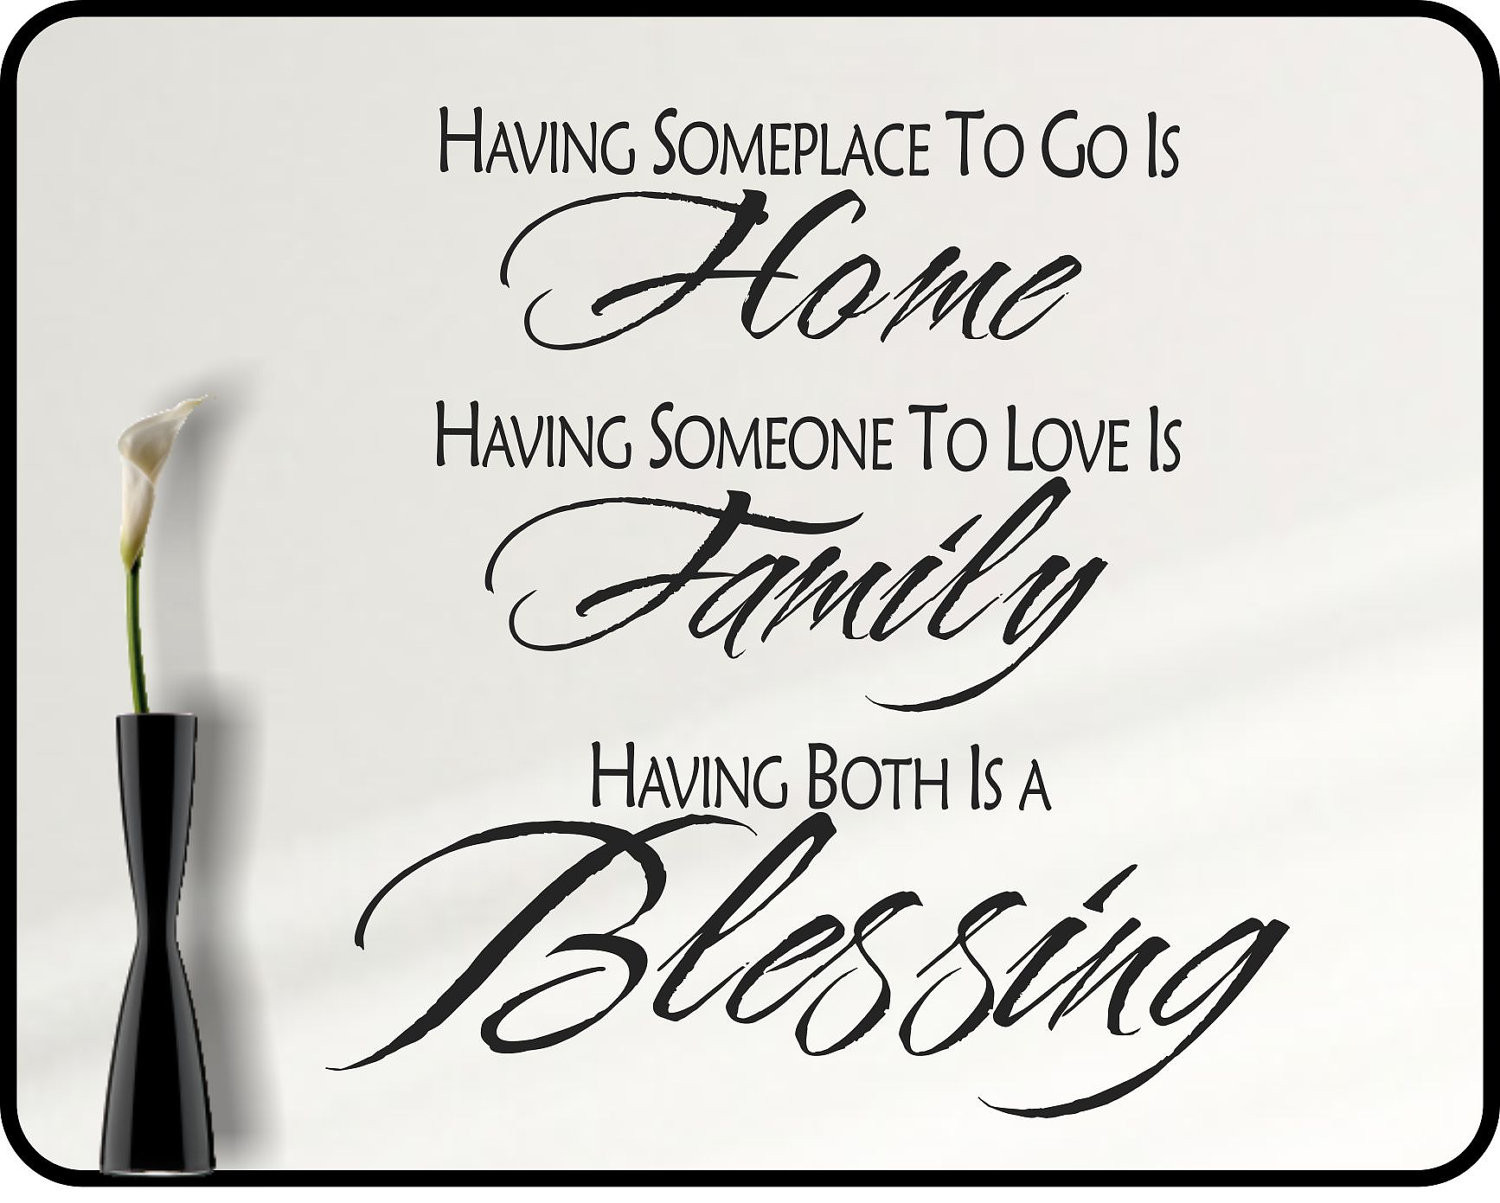 Positive Family Quotes
 Inspirational Family Wall decal quote family blessing home